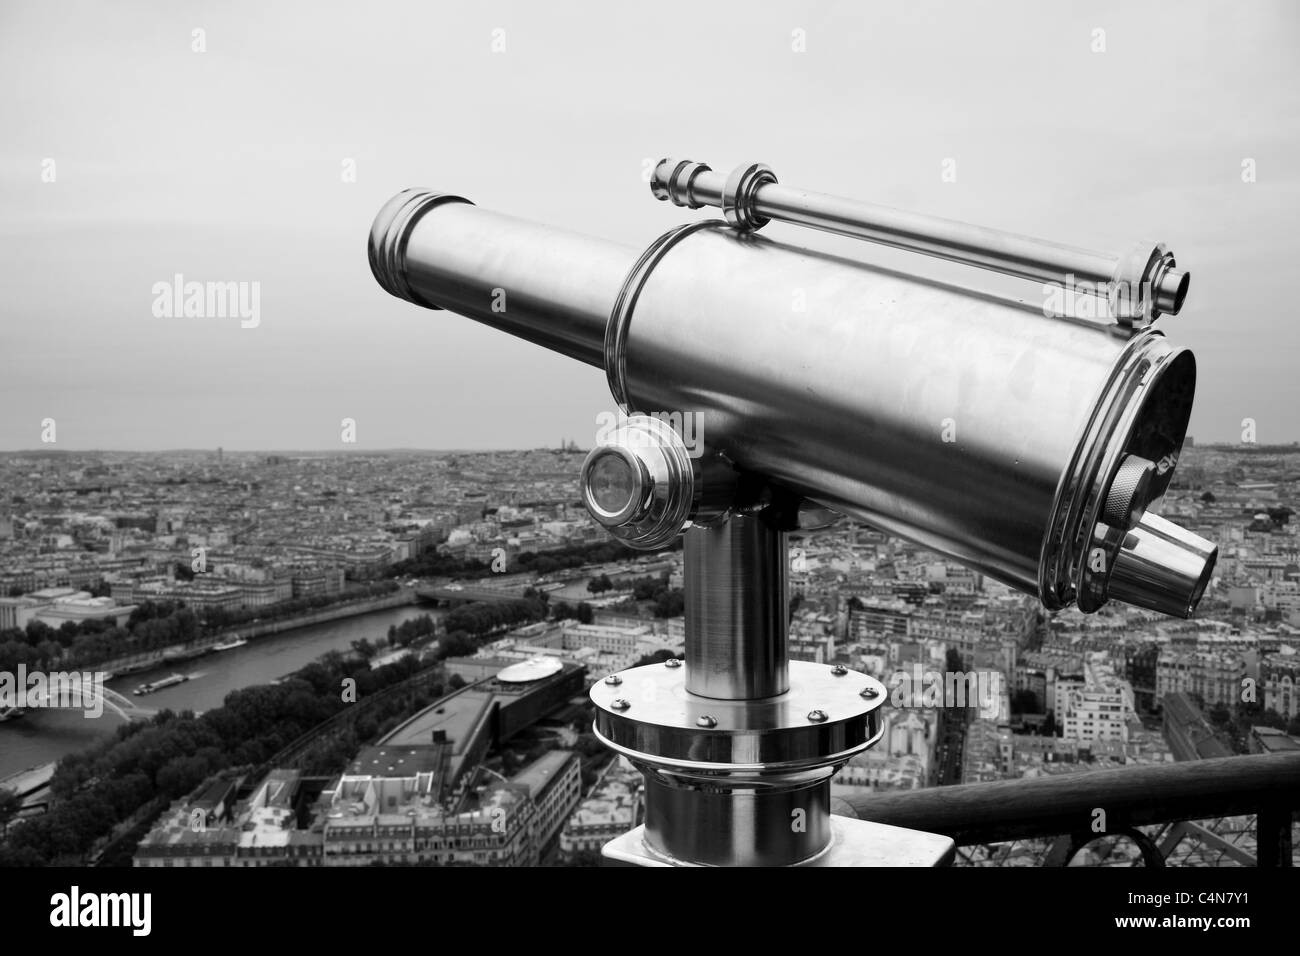 A viewing telescope on the viewing platform of the Eiffel Tower, Paris Stock Photo